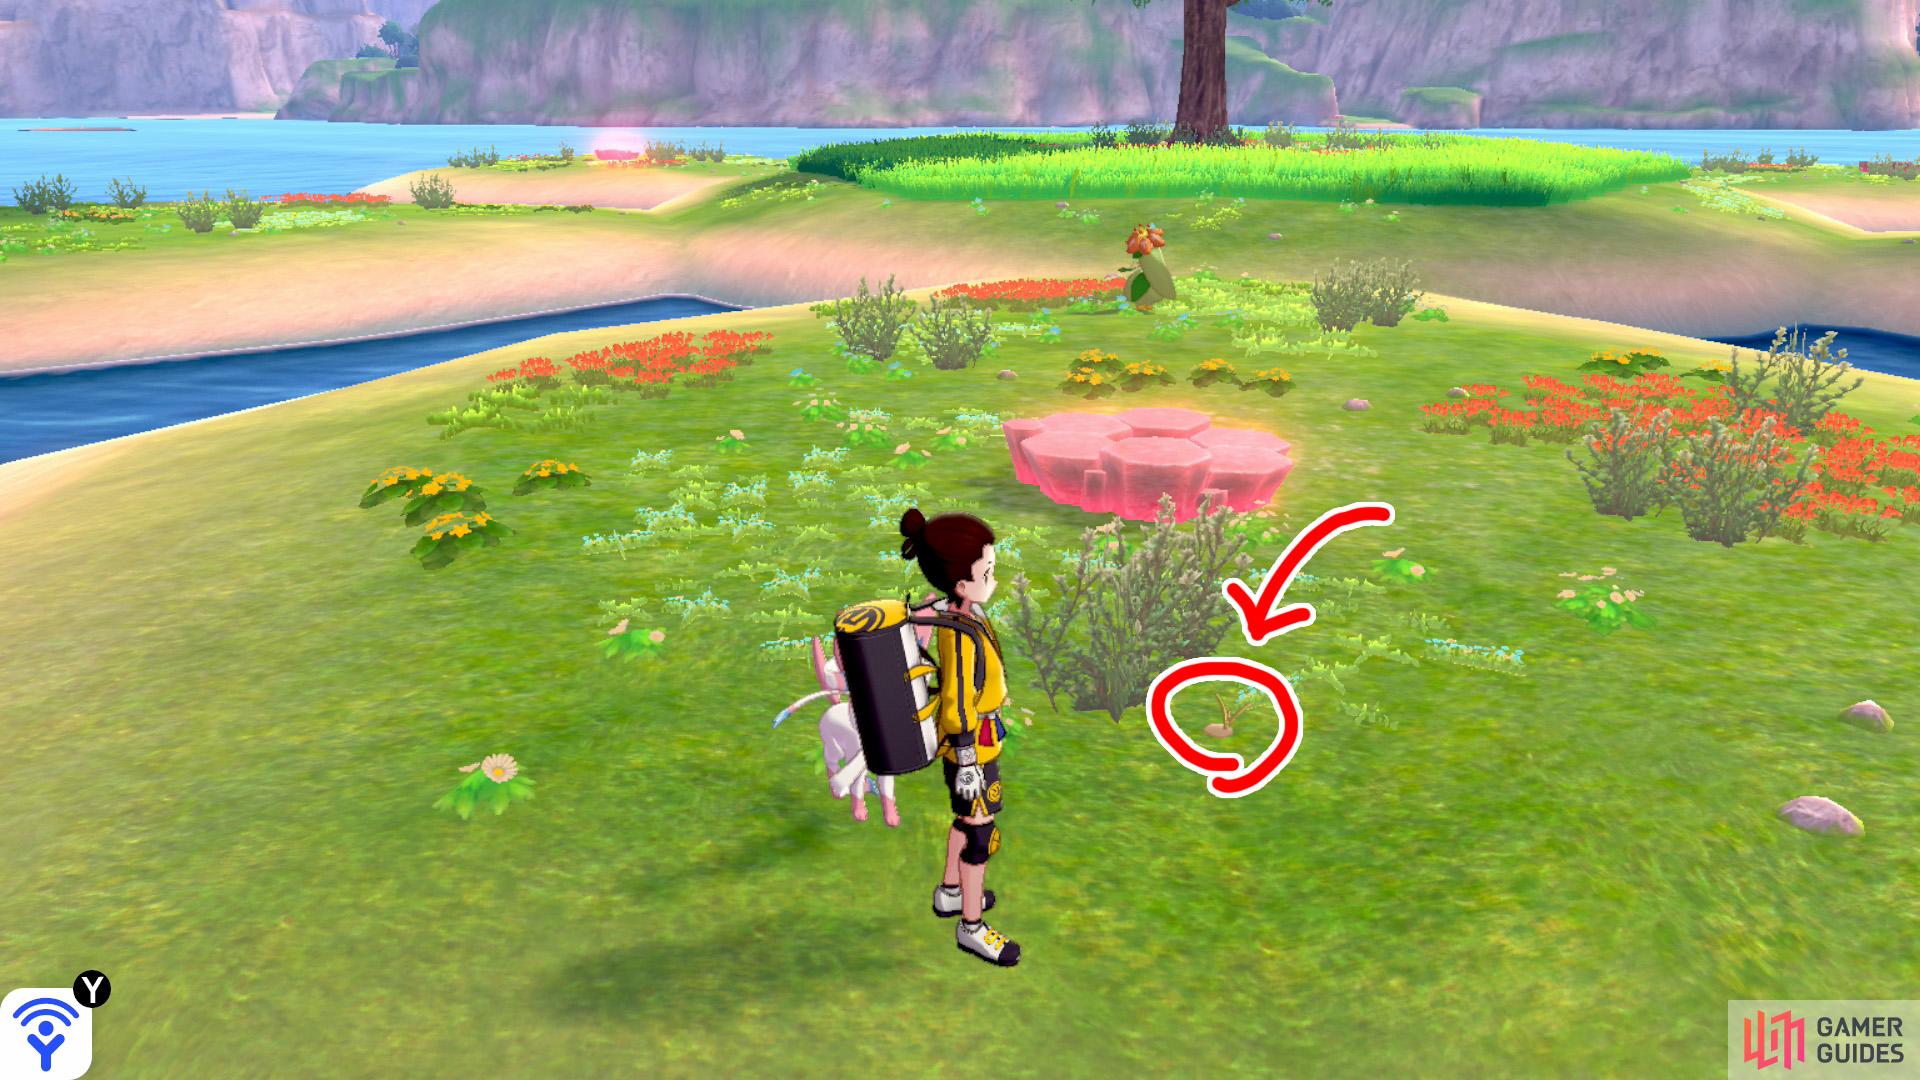 5/11: From Diglett 4, continue to the fourth "petal". This one's next to some shrubbery past the Pokémon Den, away from the island's centre.